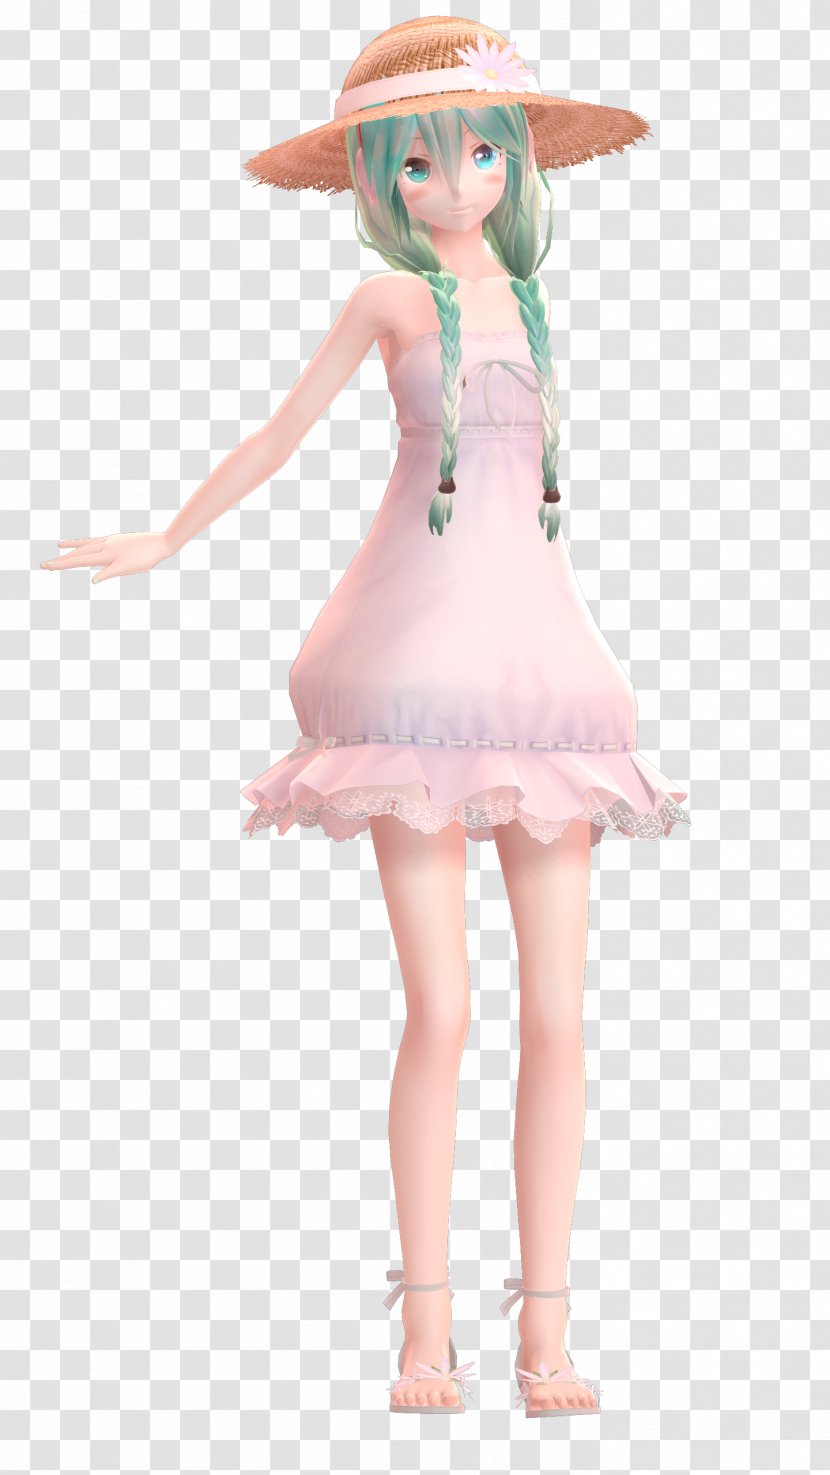 Fairy Doll - Figurine Transparent PNG